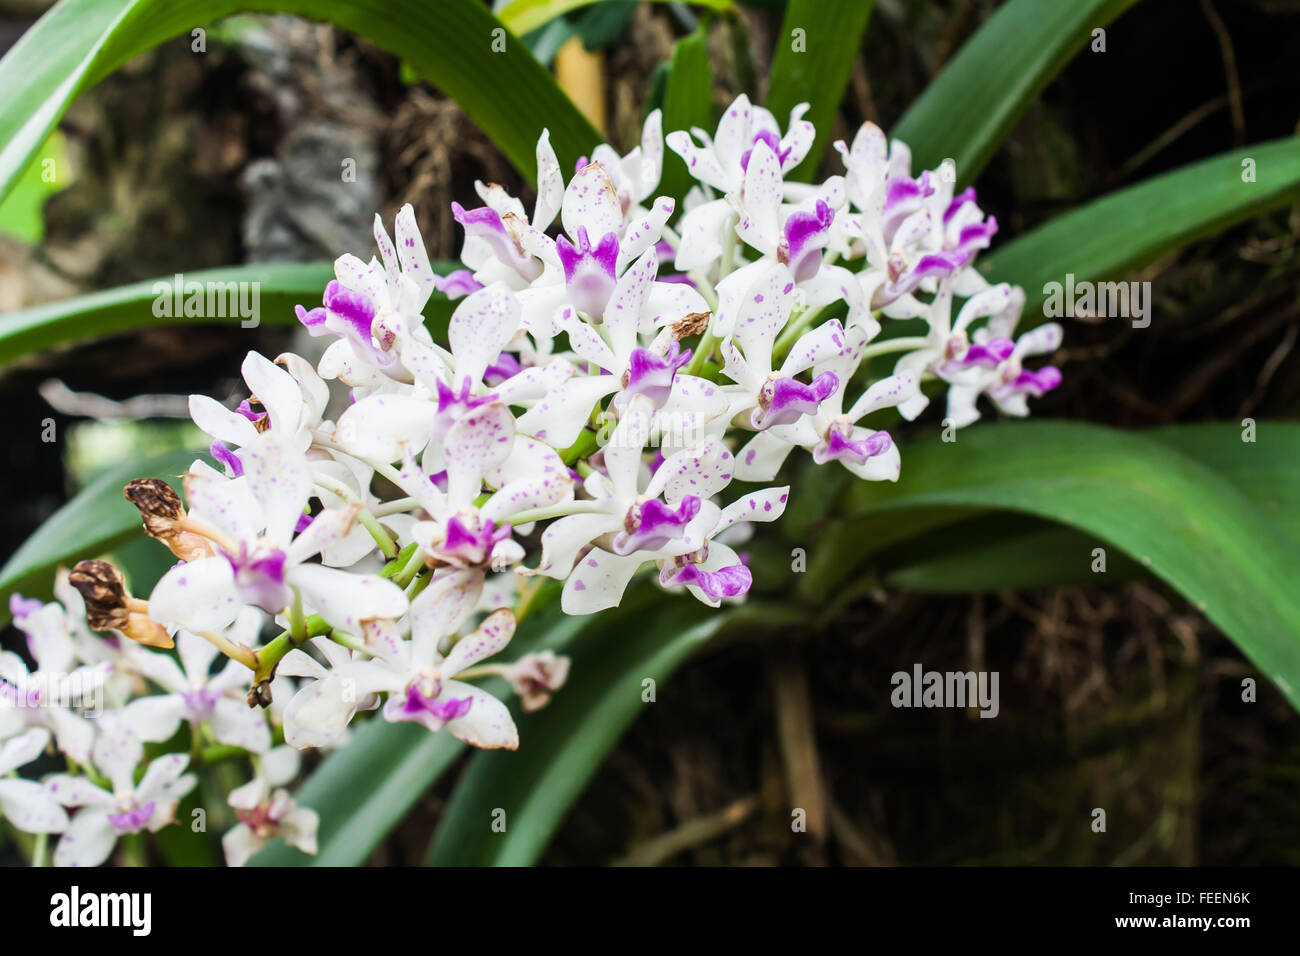 Beautiful Orchid, Rhynchostylis sp. Blooming in a Garden Stock Photo